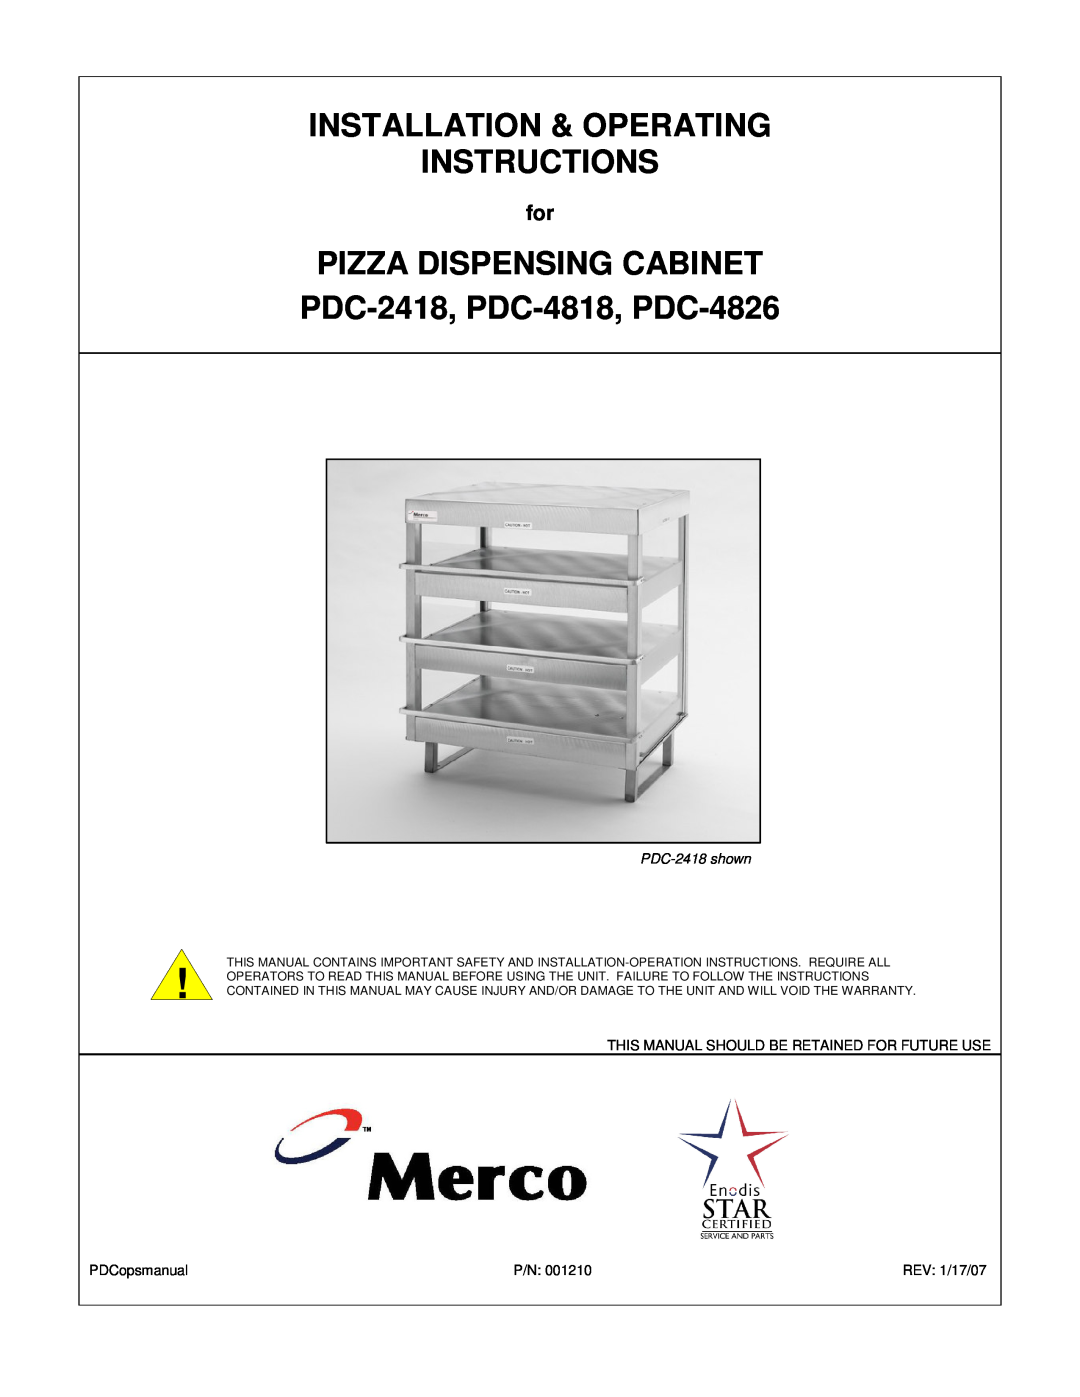 Merco Savory PDC-4818, PDC-4826 operating instructions Installation & Operating Instructions, PDC-2418 shown 